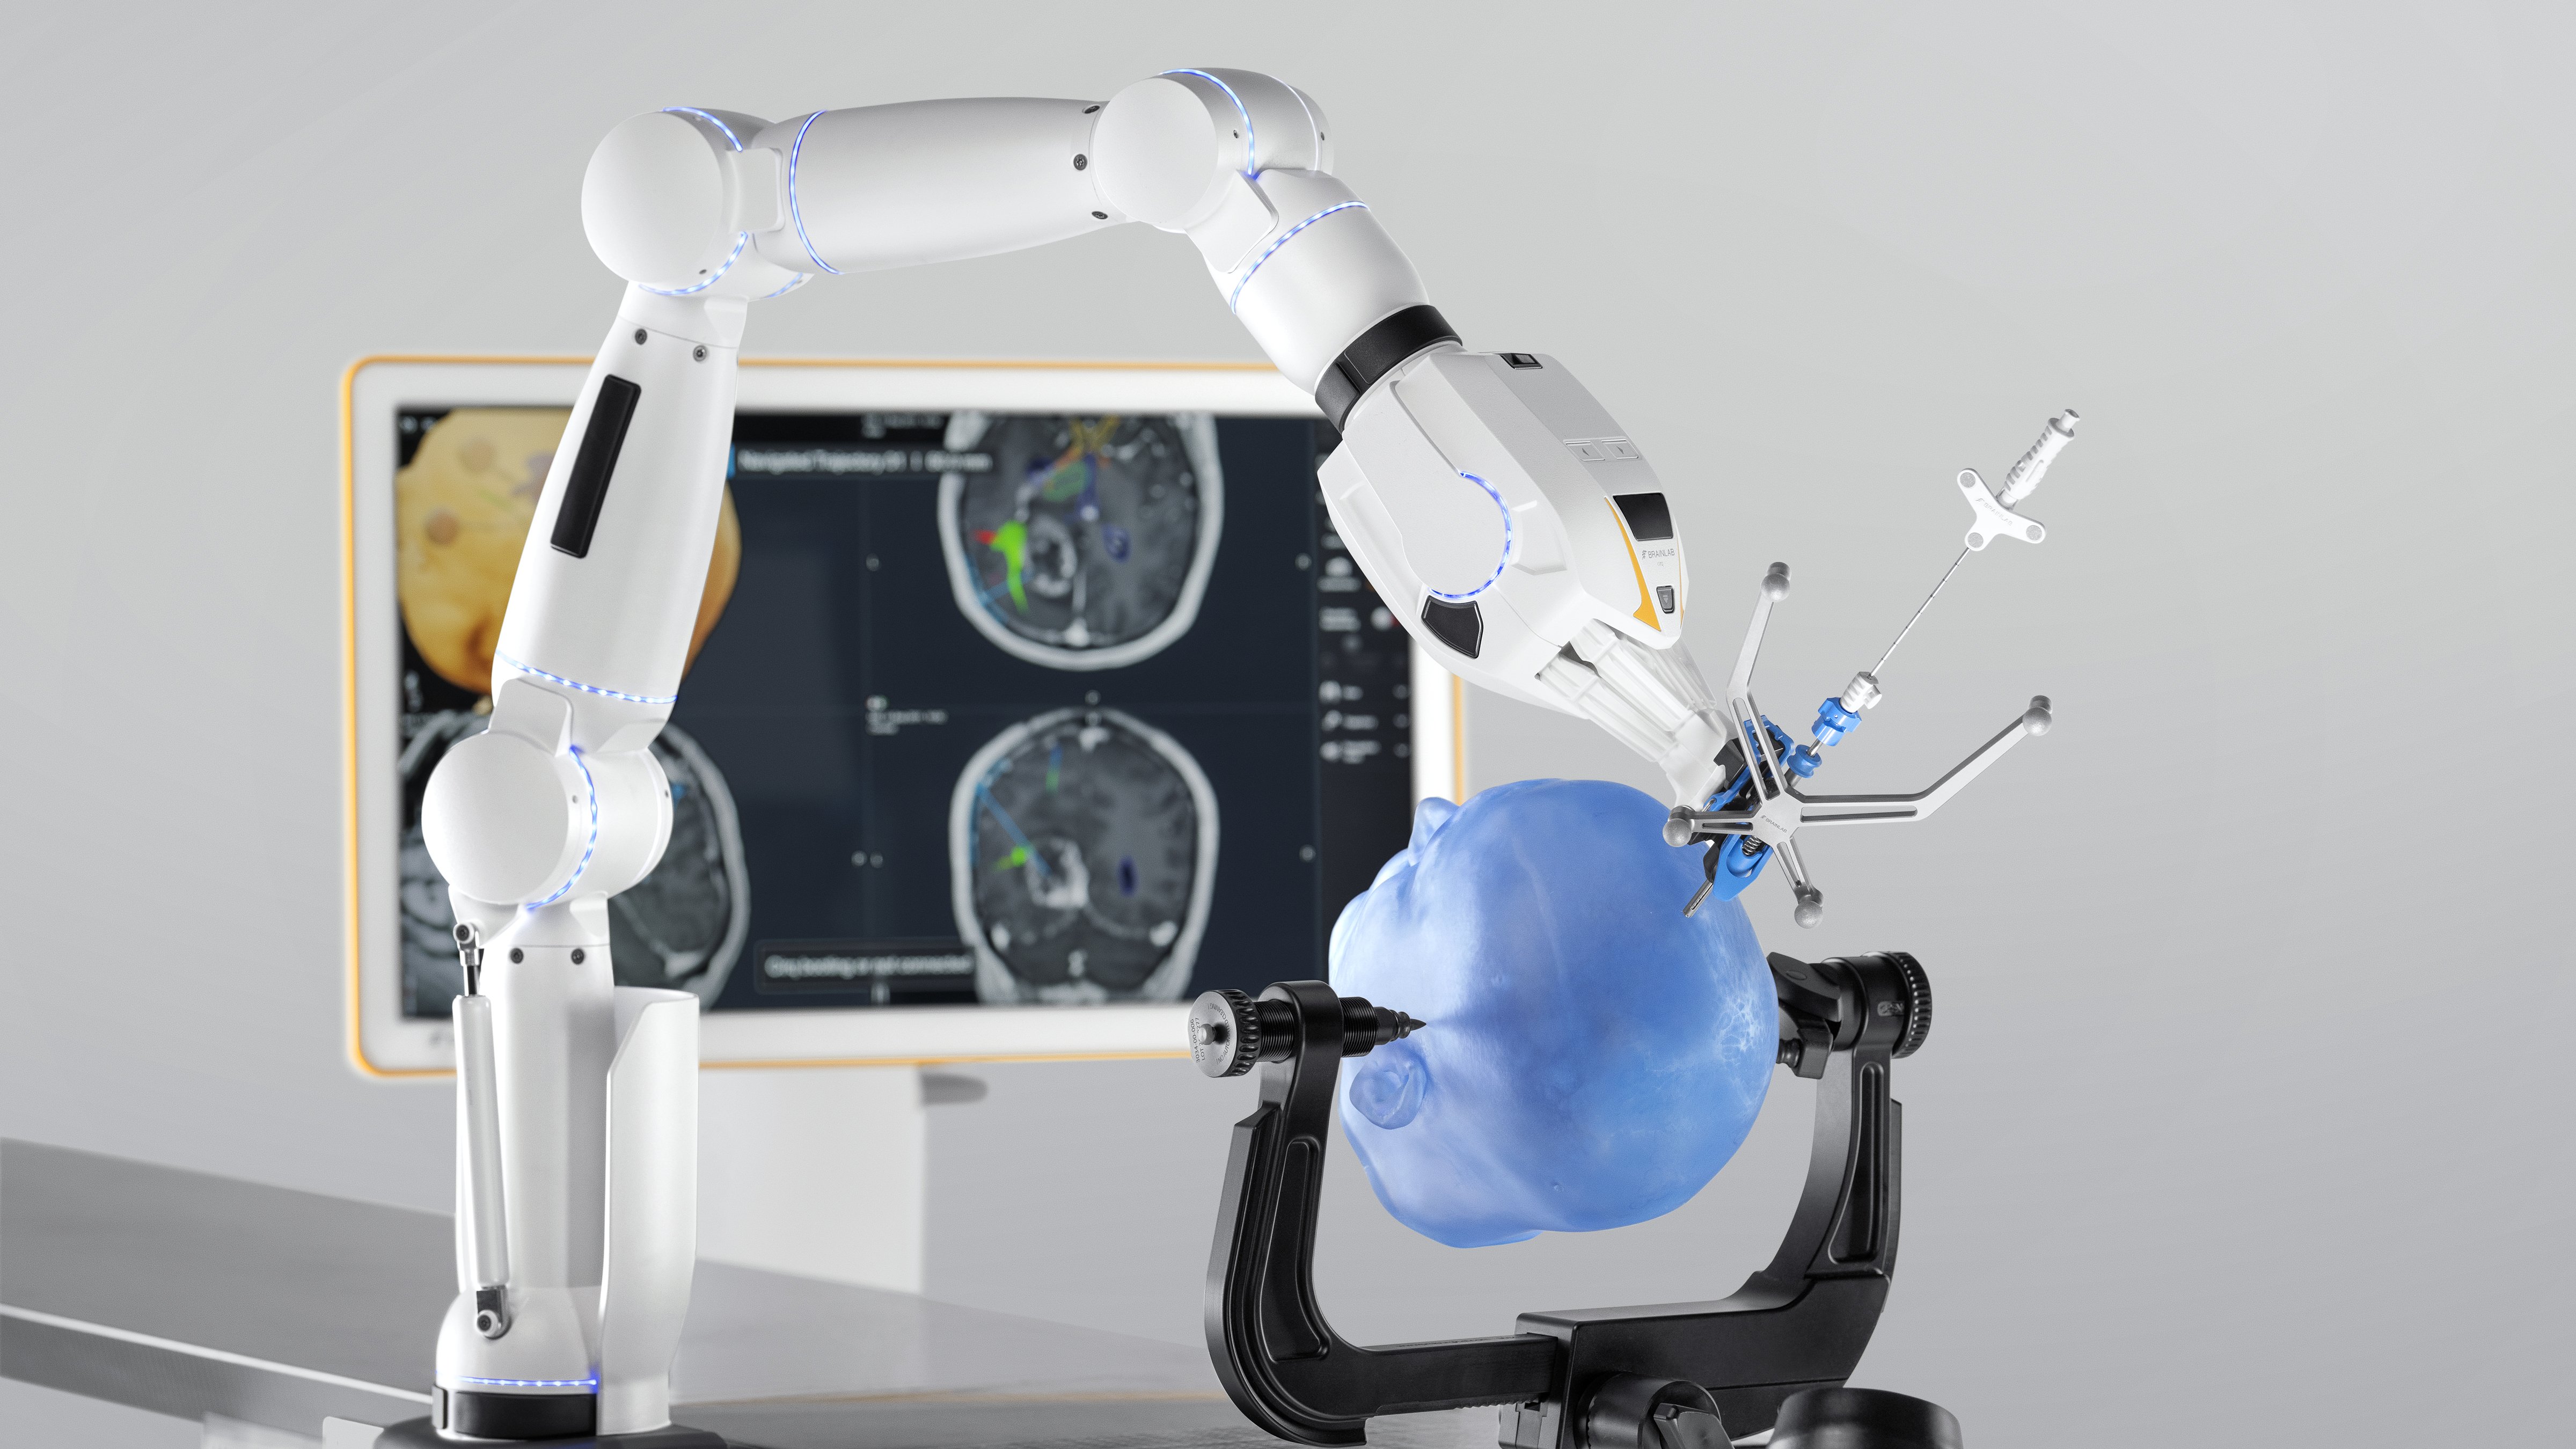 Cirq Cranial Biopsies: Table-mounted Cirq Cranial system with monitor displaying software, accompanied by a phantom patient